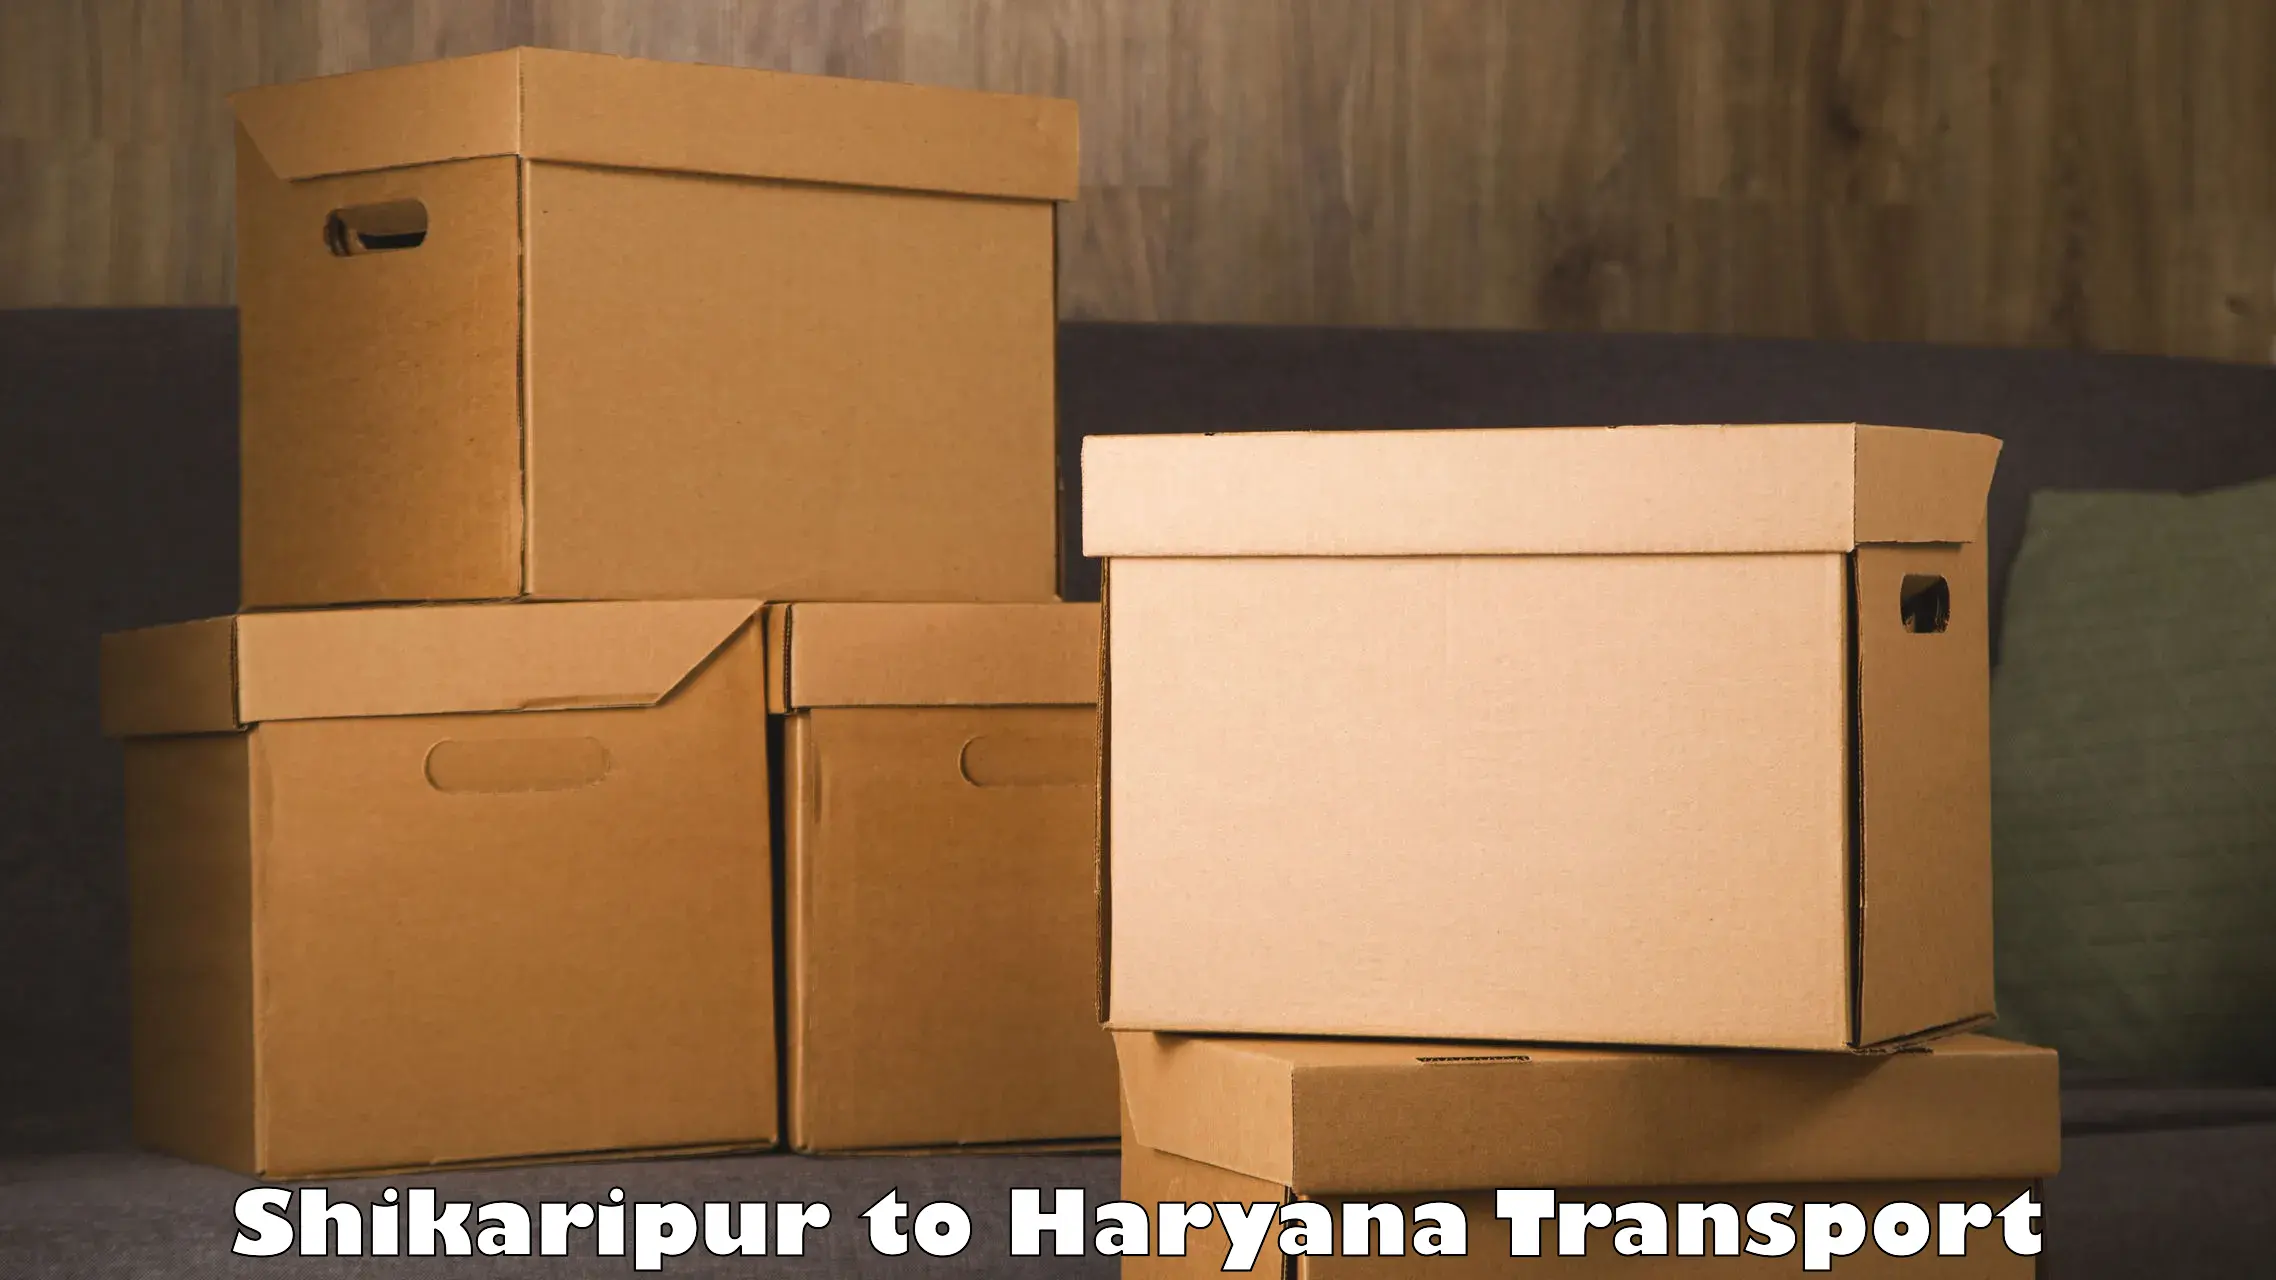 Commercial transport service Shikaripur to Fatehabad